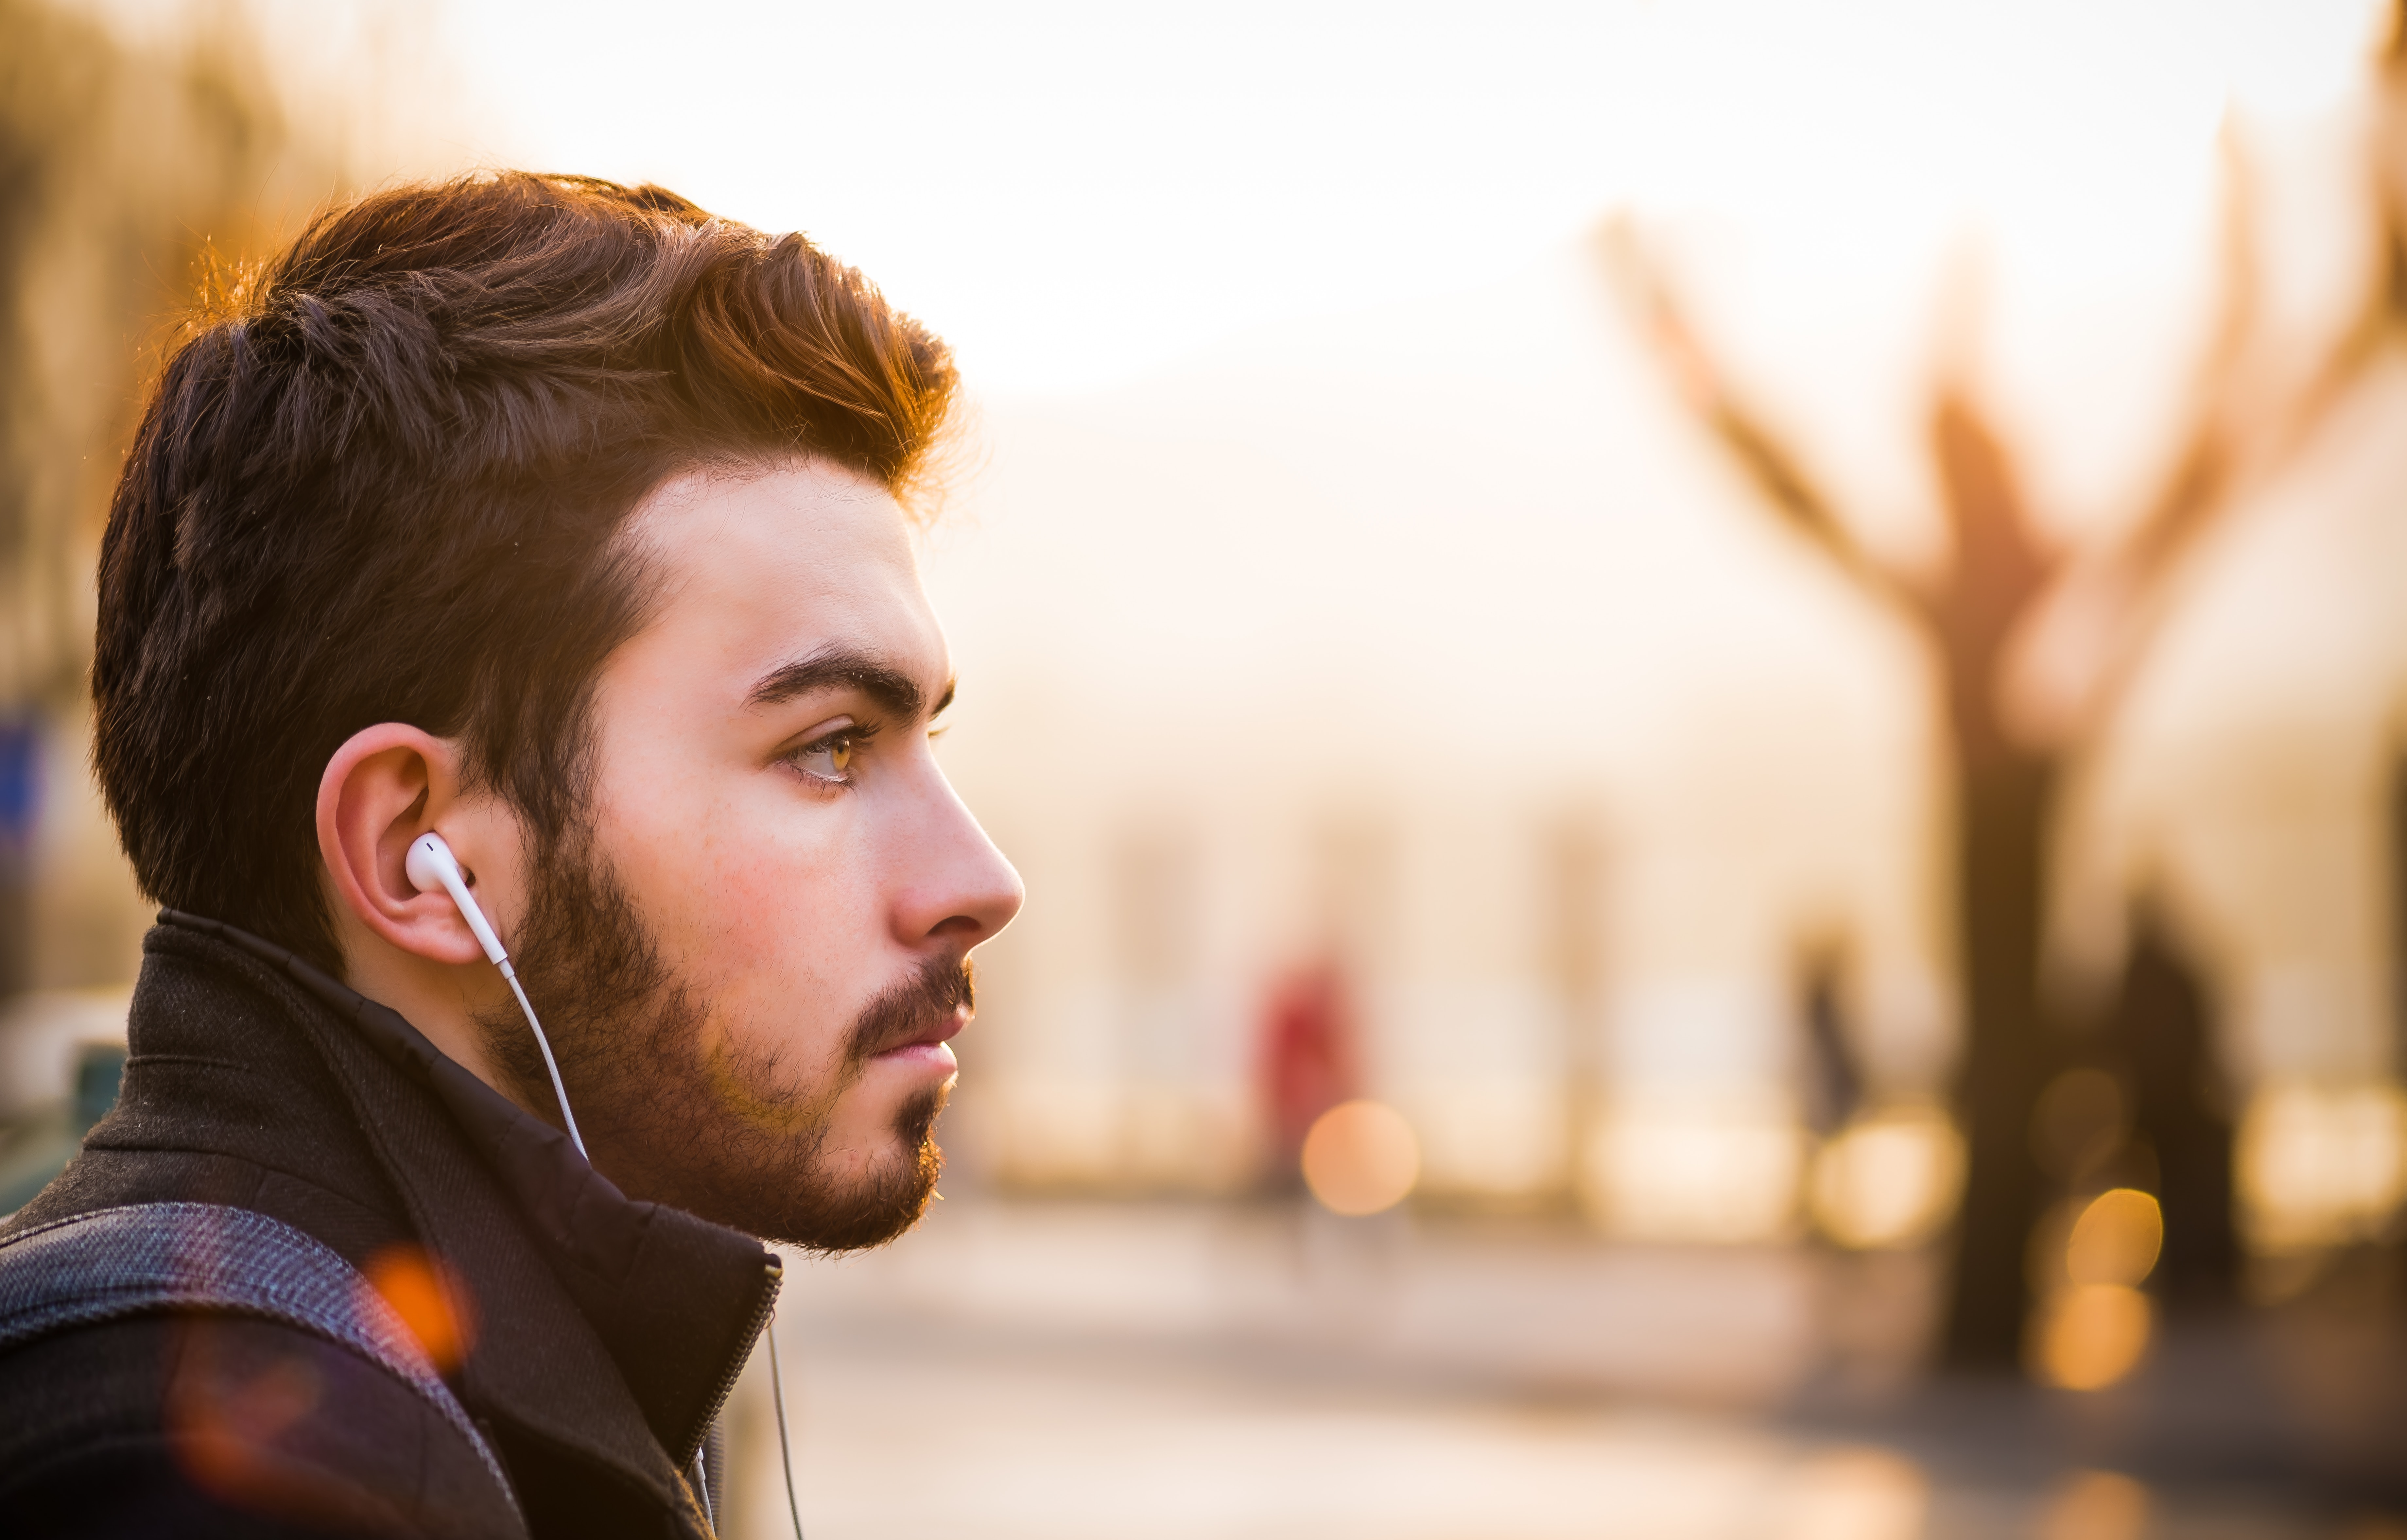 A young man is pictured in profile, with headphones in his ears and staring off into the distance. He is outside. He may be praying silently for his non-believer friends.